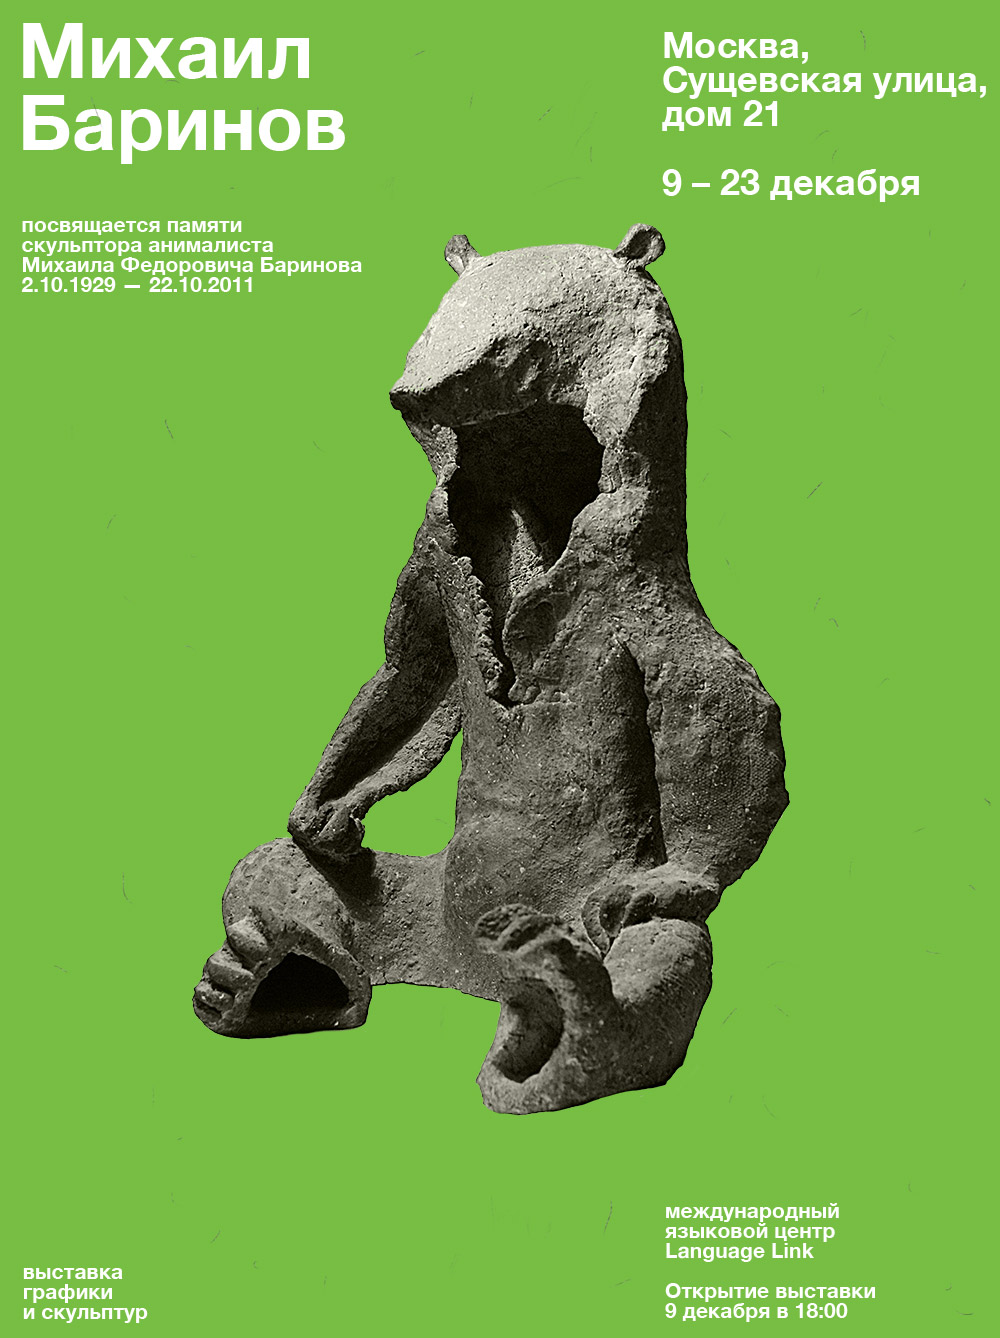 poster that invited guests to one of Michael Barinov exhibitions